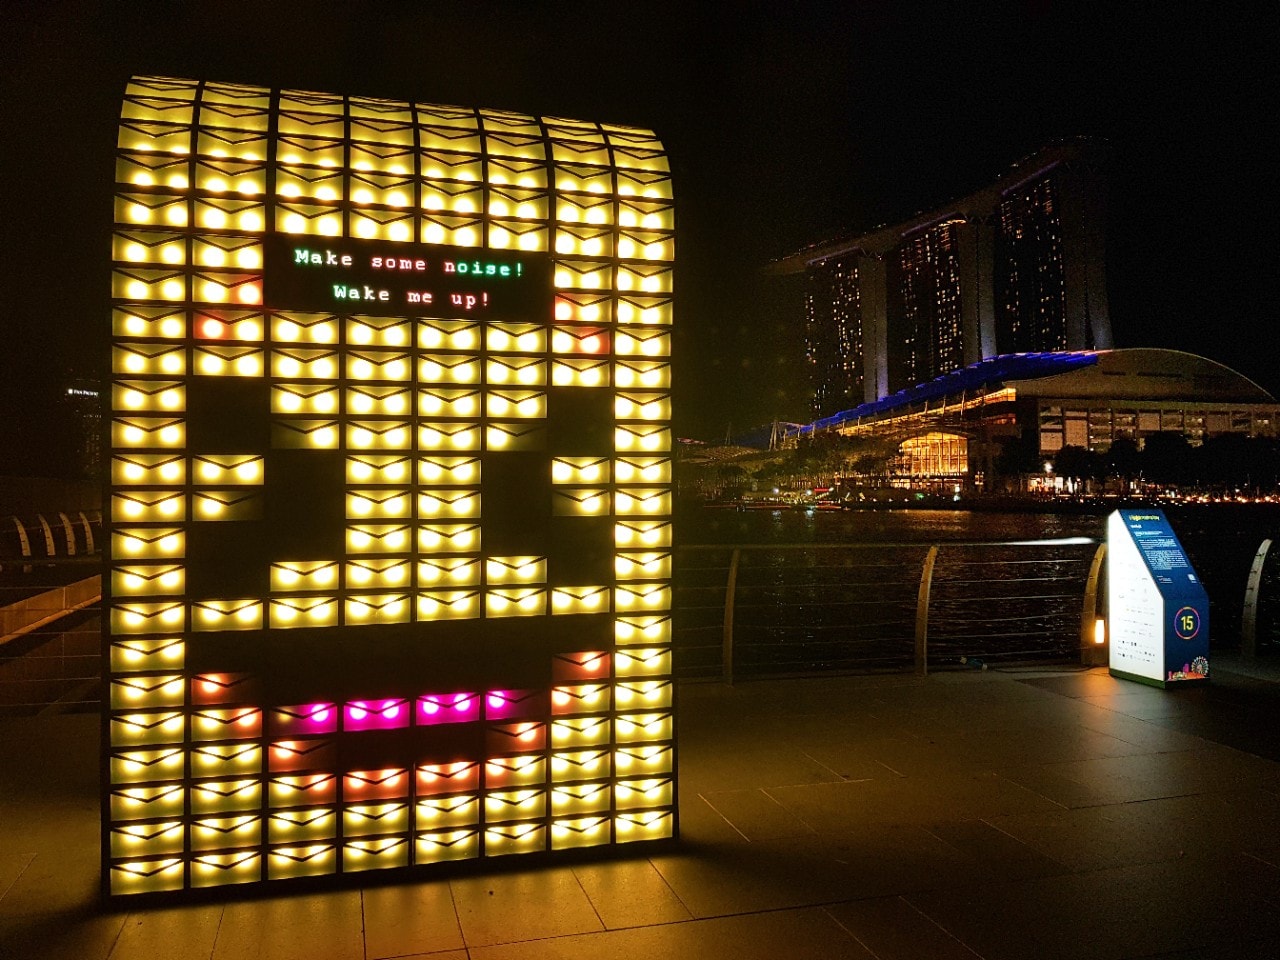 Mailbox project on show in Singapore